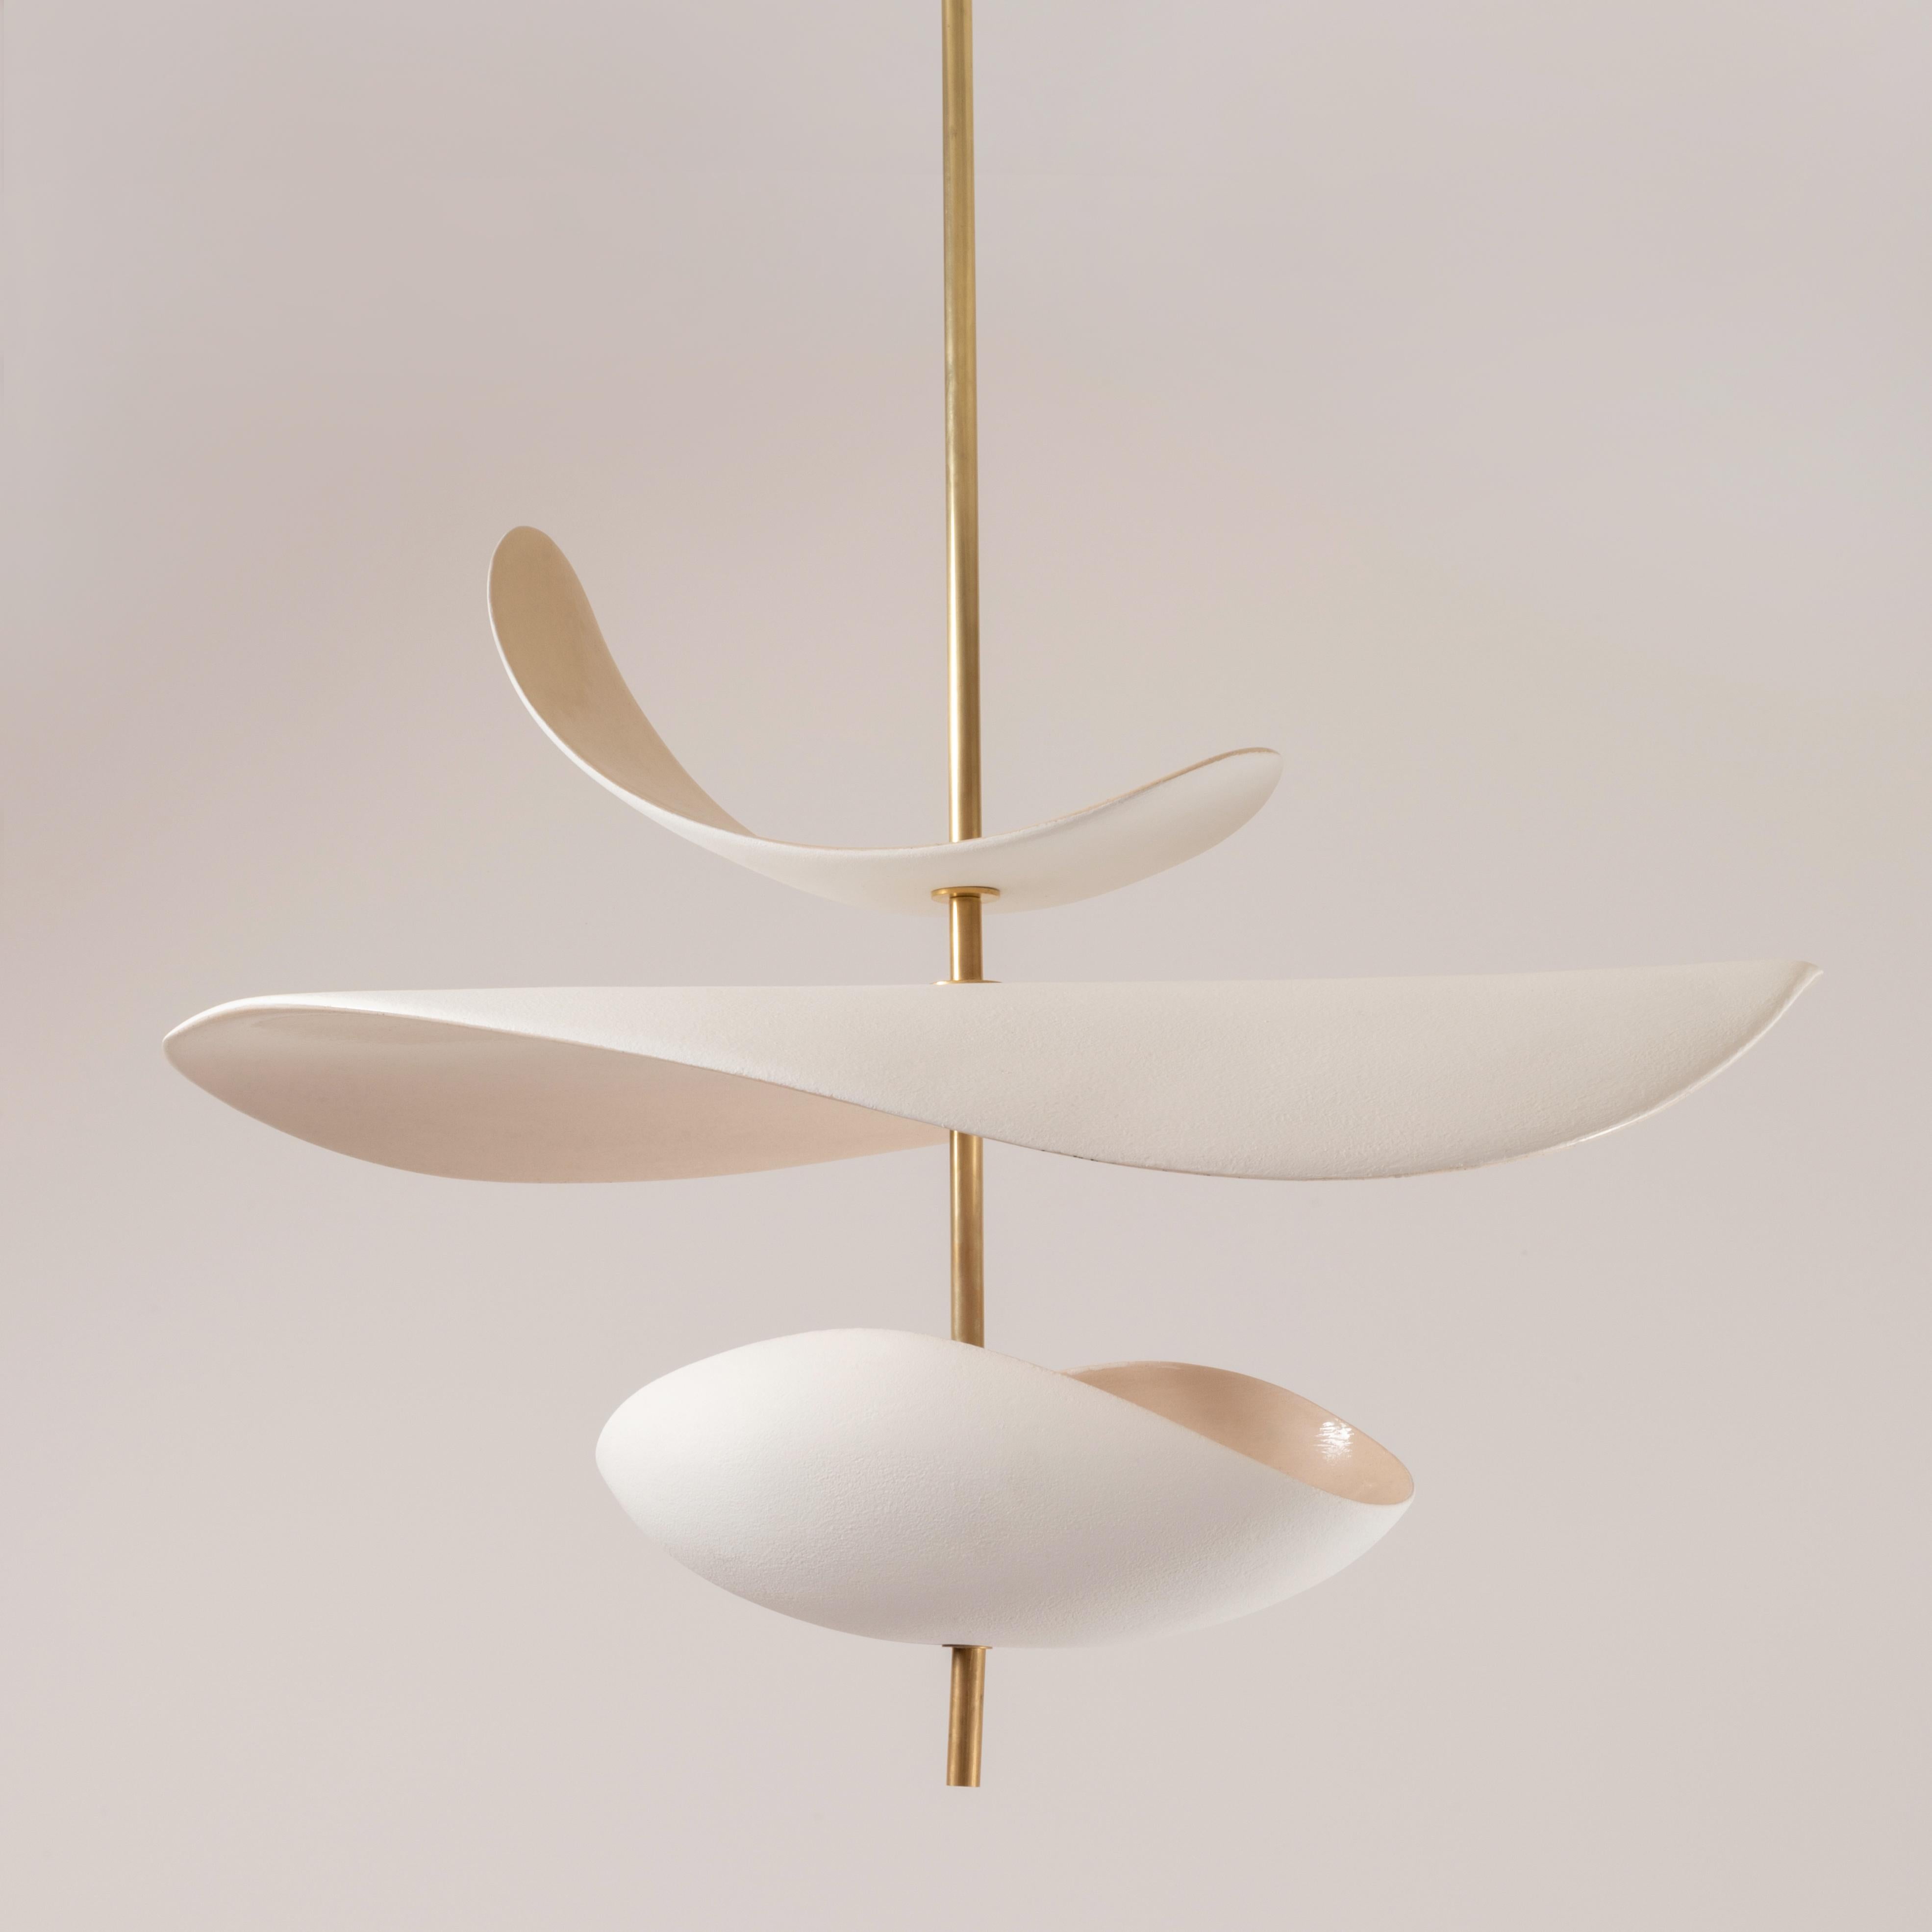 Free form B pendant by Elsa Foulon.
Standard size.
Dimensions: D 55-60 cm.
Materials: ceramic, brass.
Unique Piece
Also available in different options: bowl or cup (lower part).
The height is min 65 cm and customizable to the customer's size.